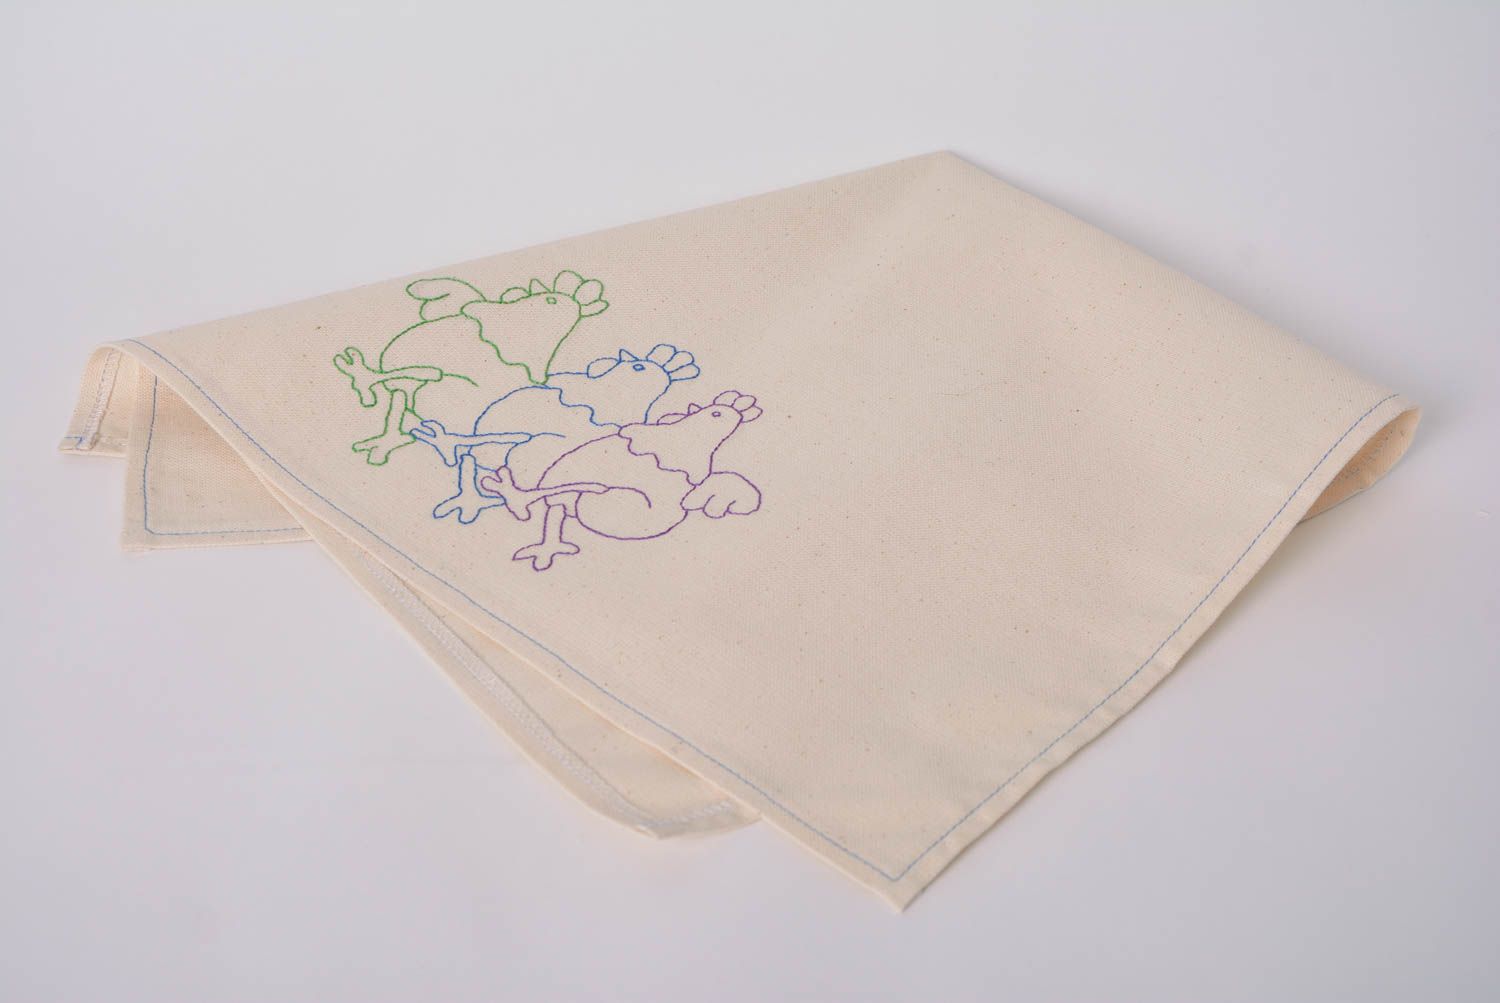 Handmade tea towel made of natural fabric with embroidery kitchen decor ideas photo 3